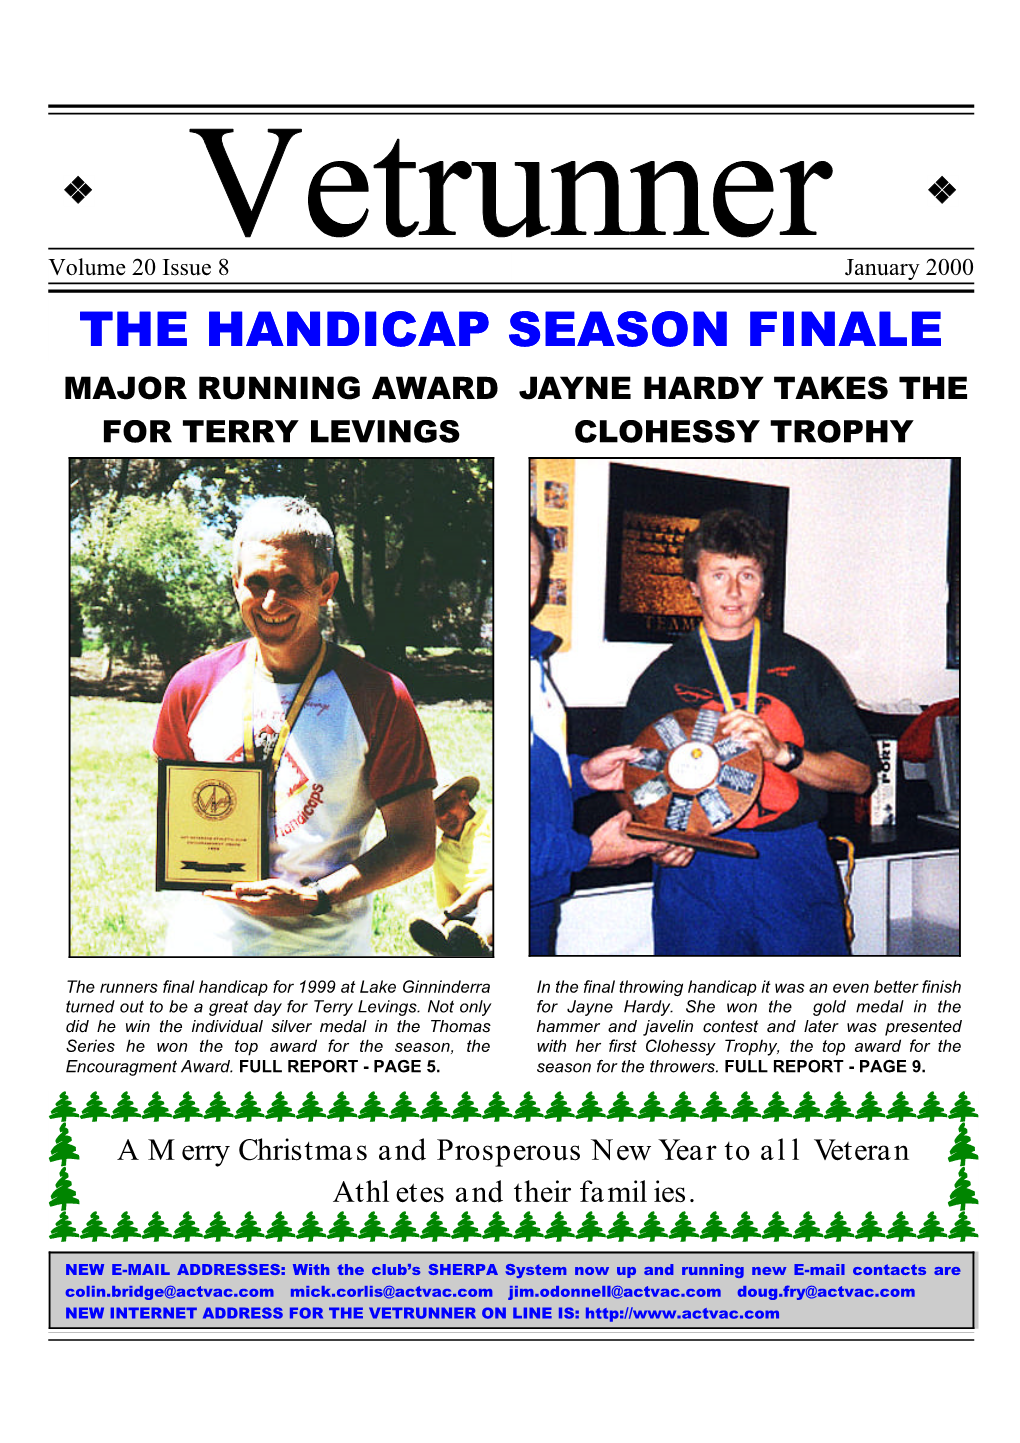 The Handicap Season Finale Major Running Award Jayne Hardy Takes the for Terry Levings Clohessy Trophy